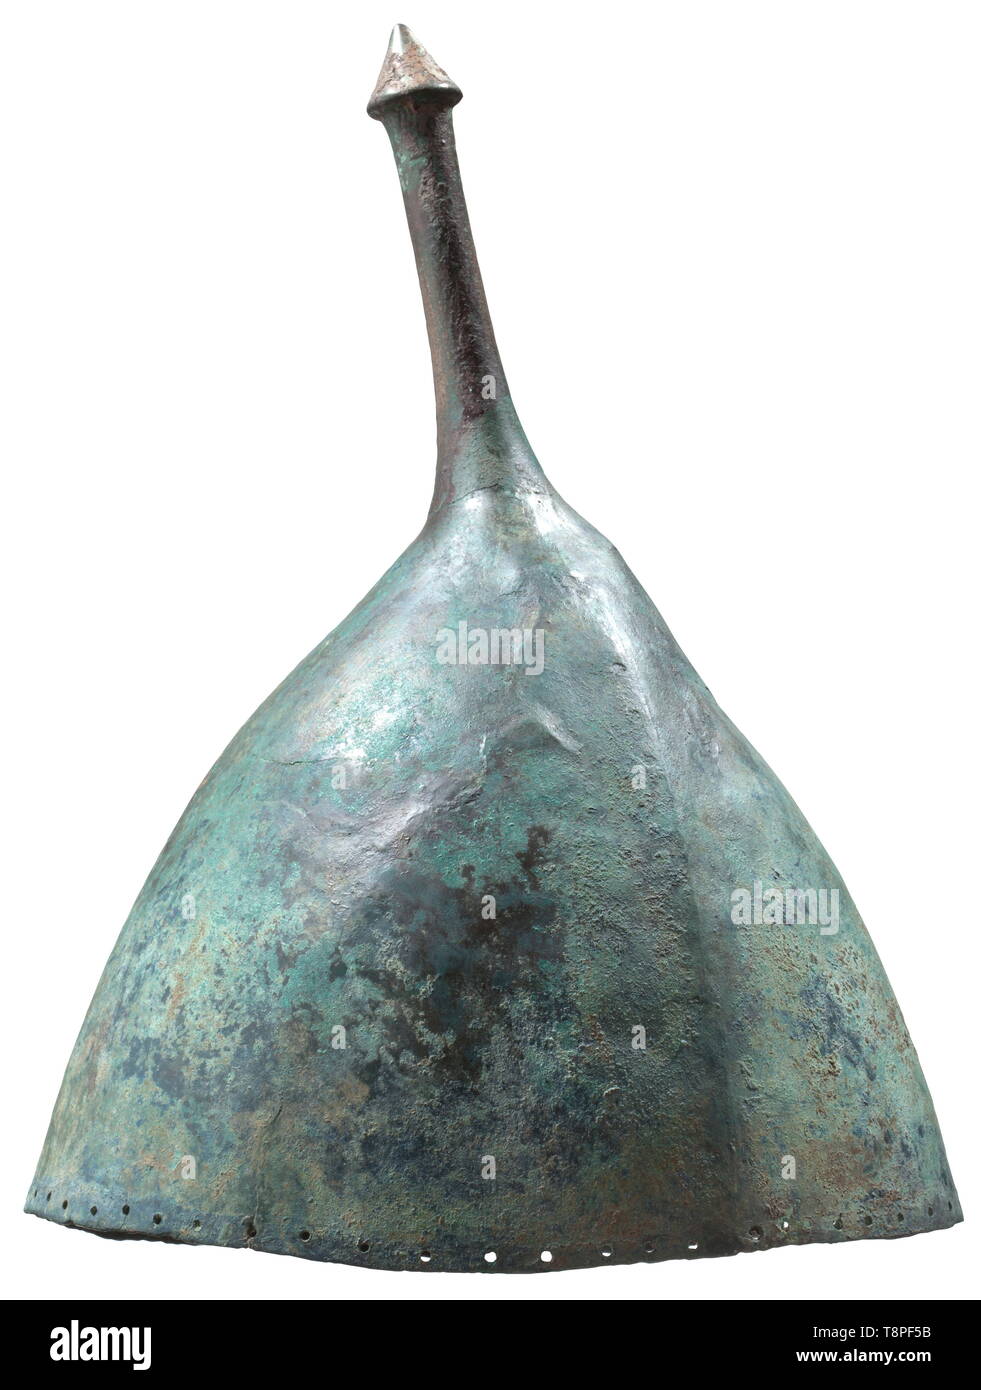 An Assyrian pointed, conical bronze helmet, 8th - 7th century BC Featuring an indistinct medial ridge and long stem crowned by a conical spike, probably used for the fastening of a crest. Ap ancient world, Additional-Rights-Clearance-Info-Not-Available Stock Photo